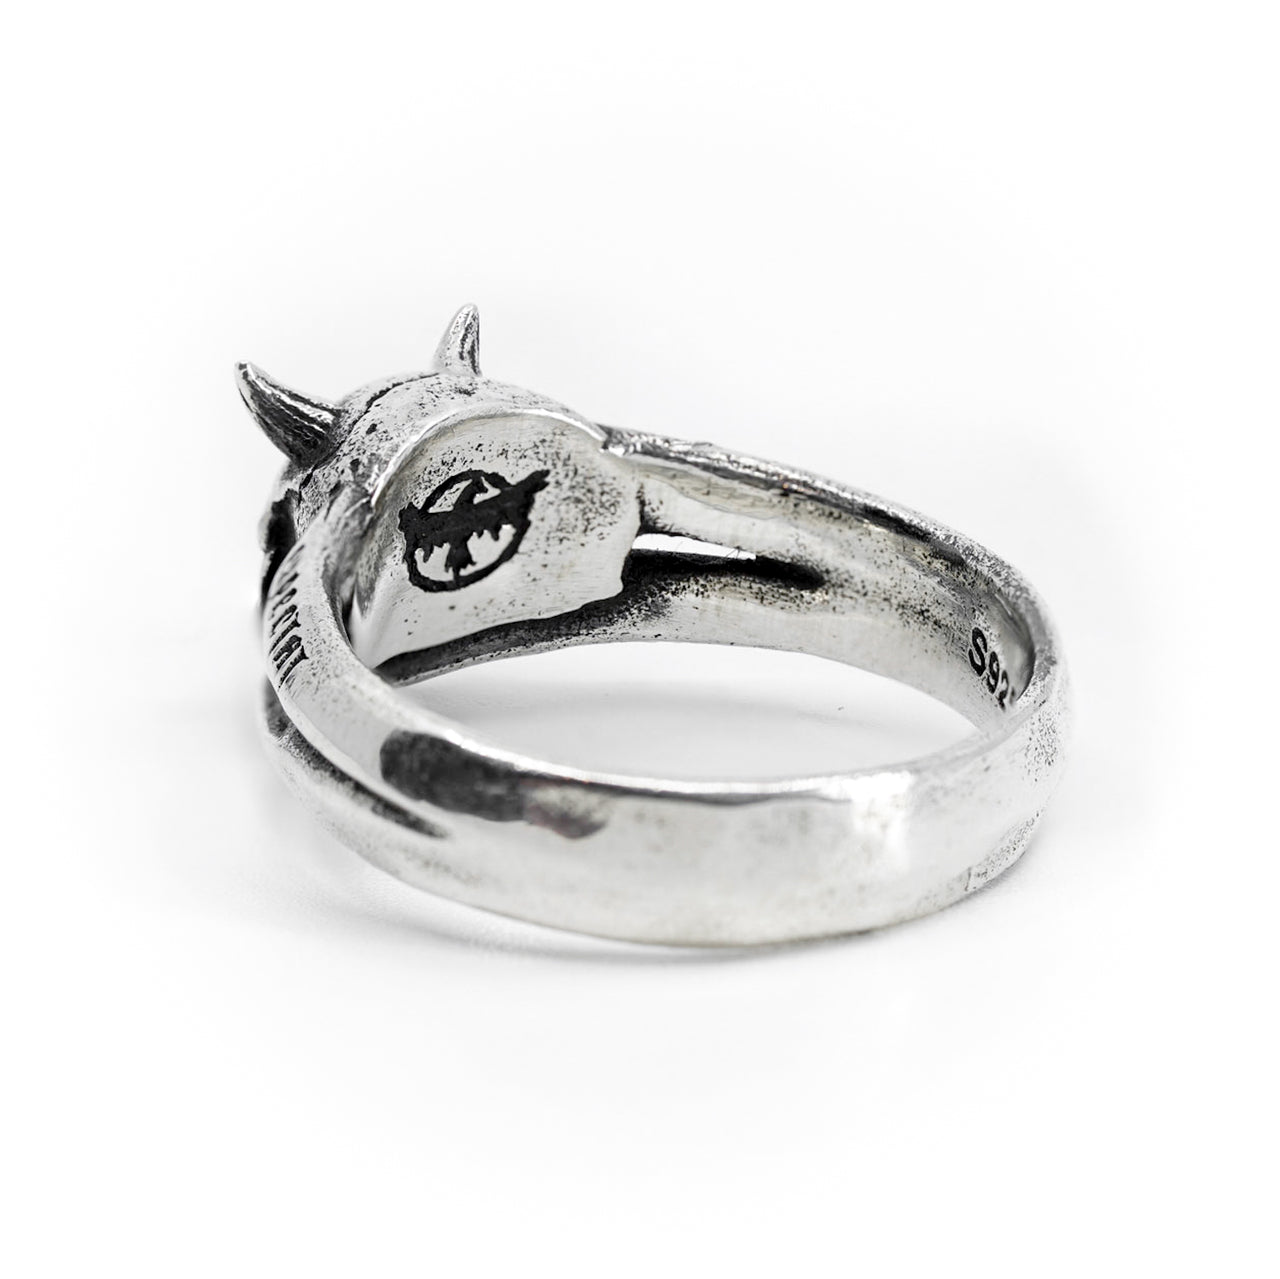 Diabolus Expectat Ring with BFD Logo - 925 Sterling Silver - Gothic Ring - Black Feather Design